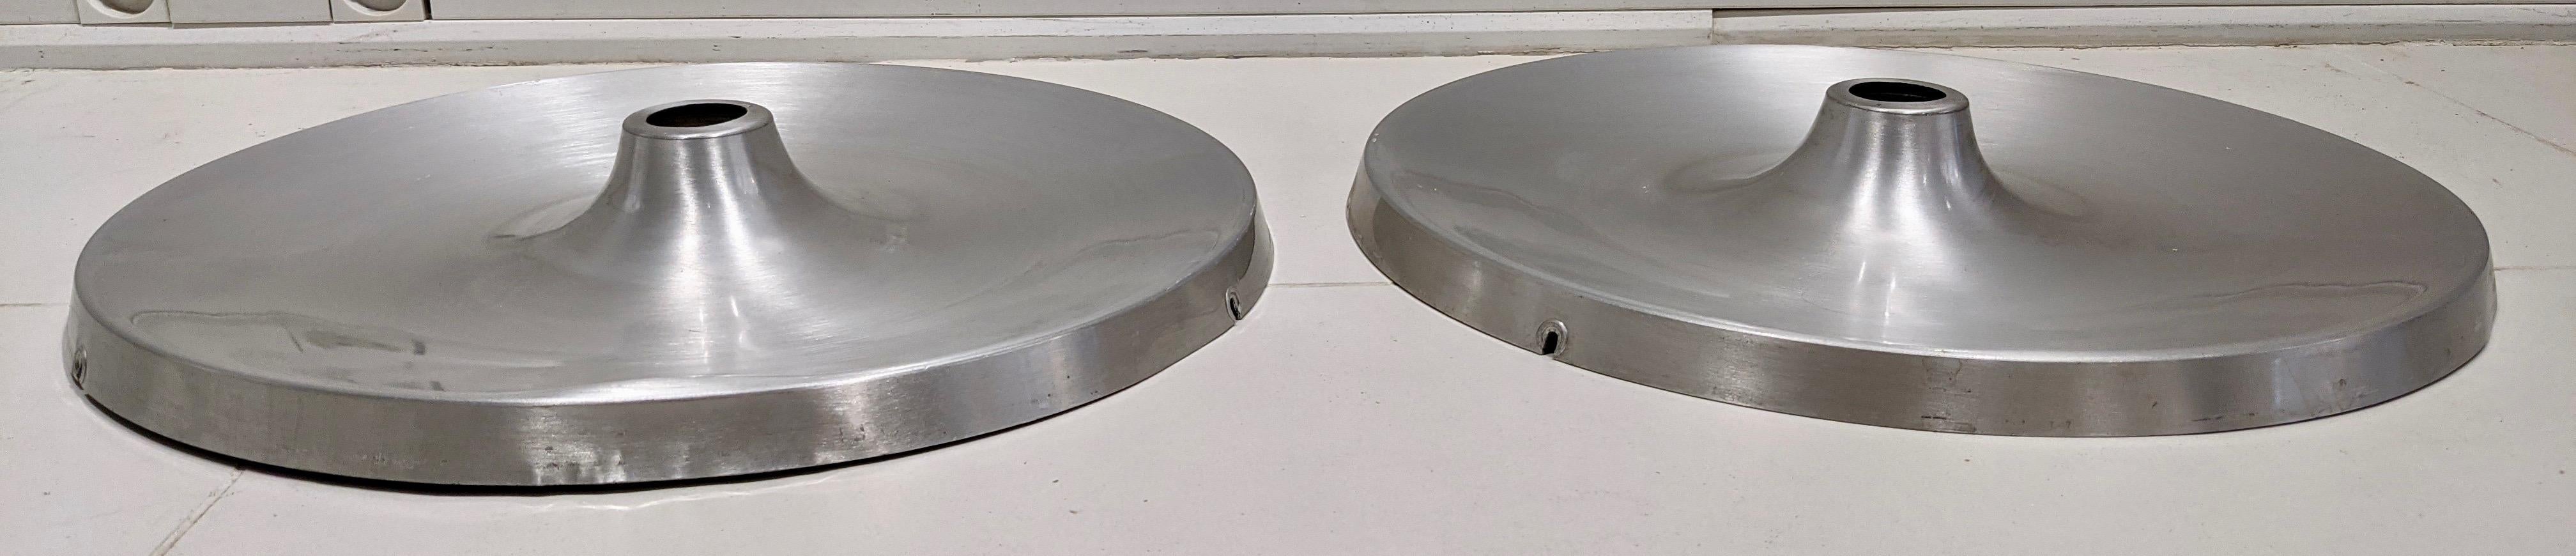 Wall sconces by Honsel Leuchten, chosen by Charlotte Perriand for Les Arcs, set of 2. 1970's. Very good condition.
Dimensions : H5 cm x D46 cm.